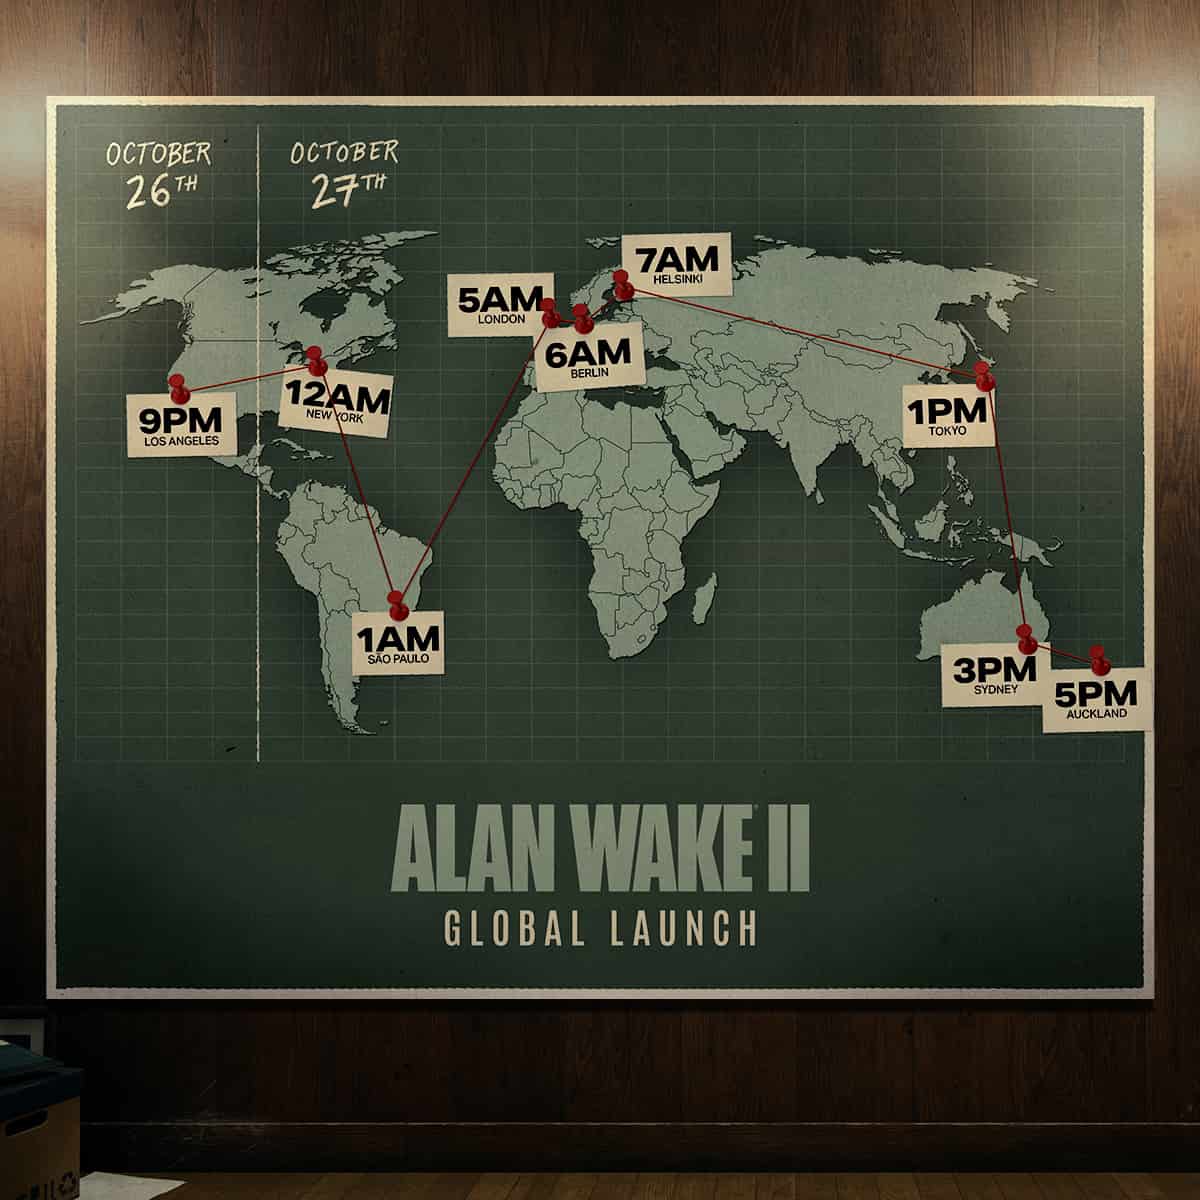 A poster for Alan Wake II's global launch, featuring a countdown and release time map.